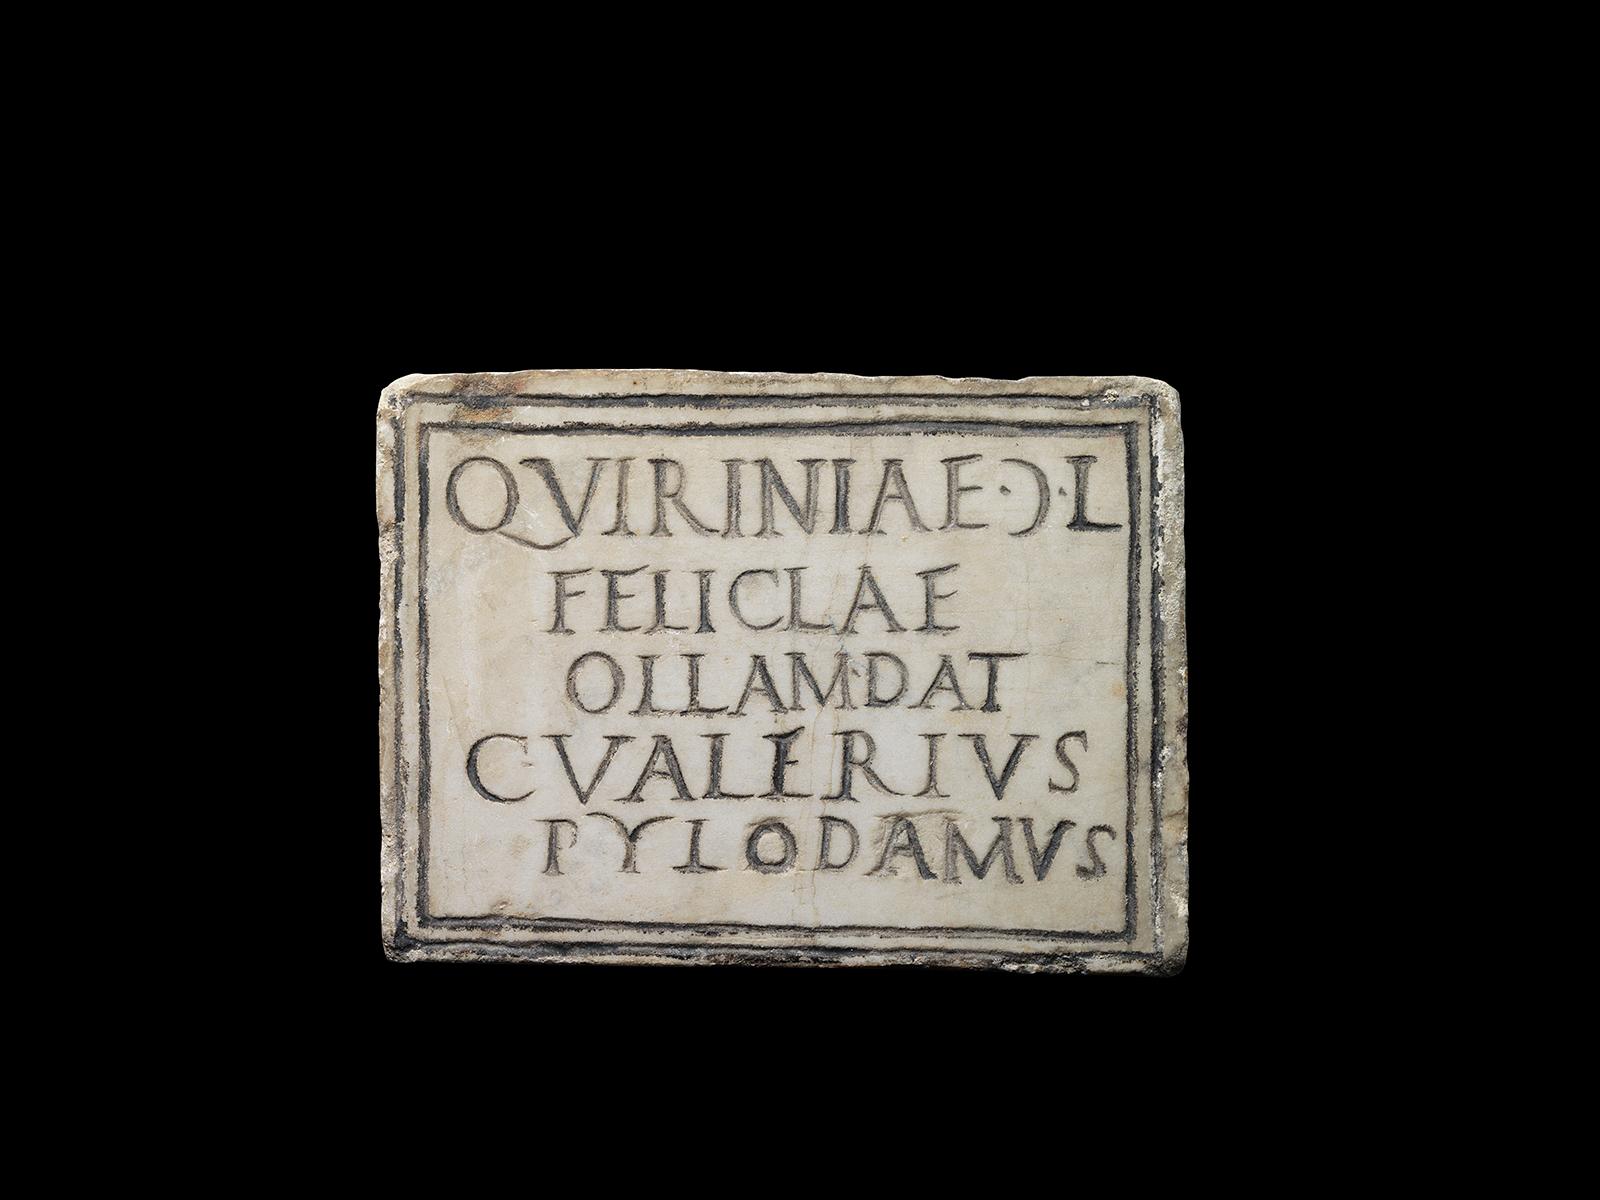 A rectangular marble slab carved with the Latin inscription ‘QVIRINIAE C(retr.) L / FELICLAE / OLLAM DAT / C VALERIVS PYLODAMVS’, which translates as ‘Gaius Valerius Pylodamus gave the burial urn to the freedwoman Quirinia Felicia’. This is a tablet